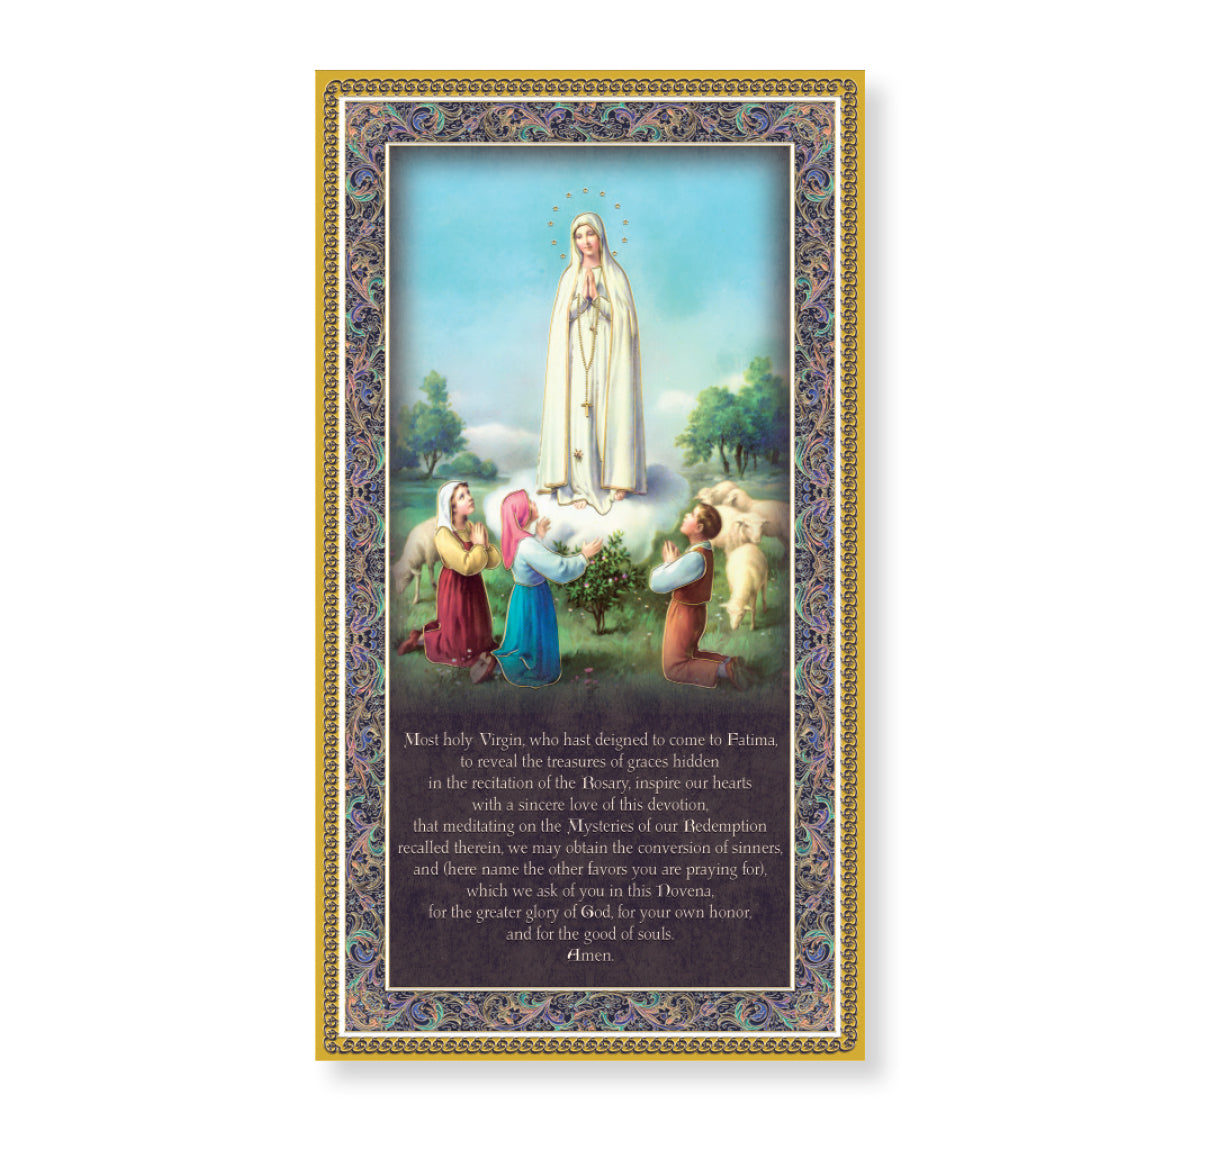 Our Lady of Fatima Gold Foil Wood Plaque